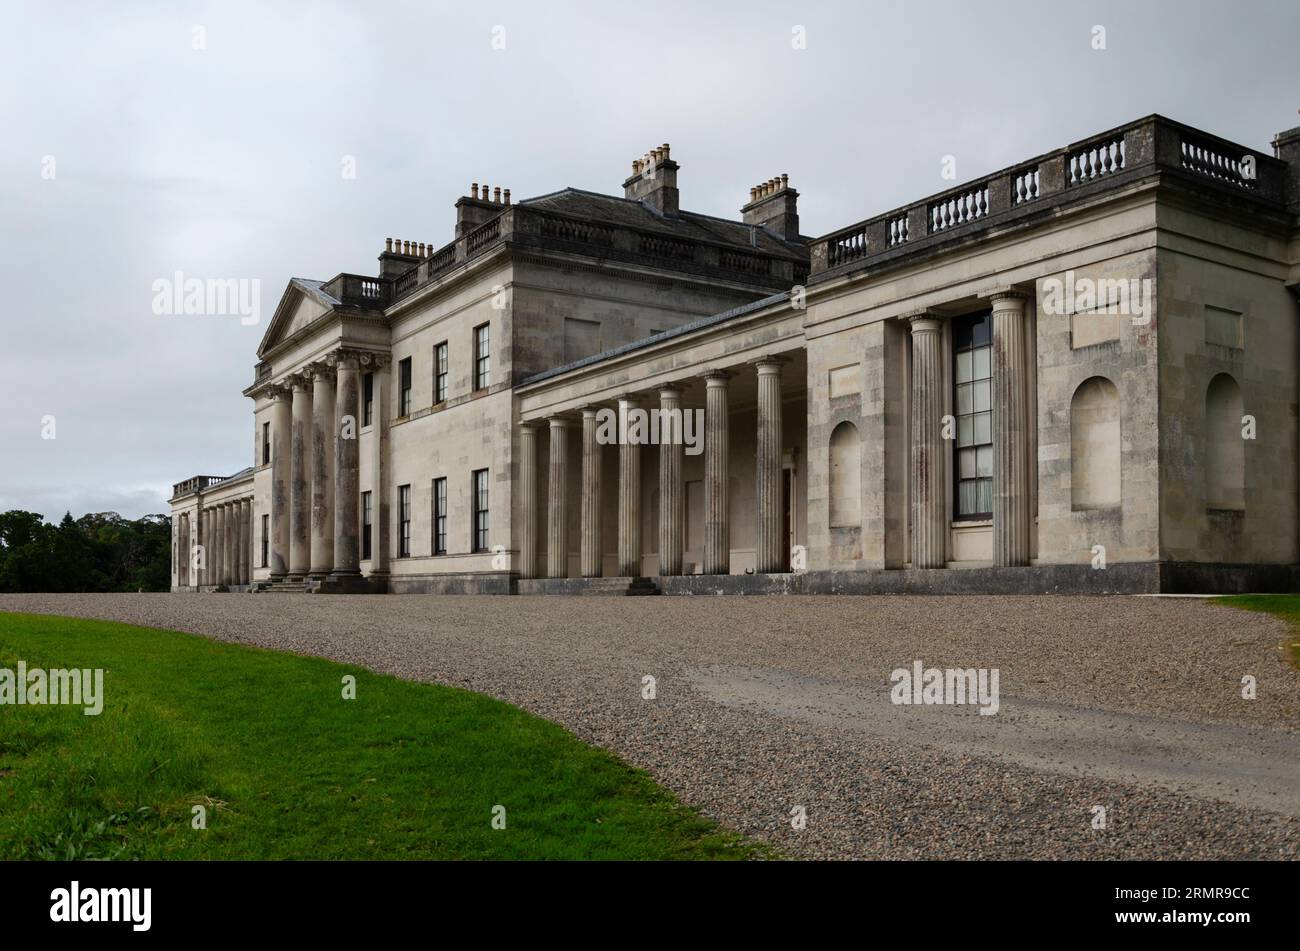 Enniskillen County Fermanagh Northern Ireland, August 28 2023 - Castle Coole country house with pillars and columns Stock Photo